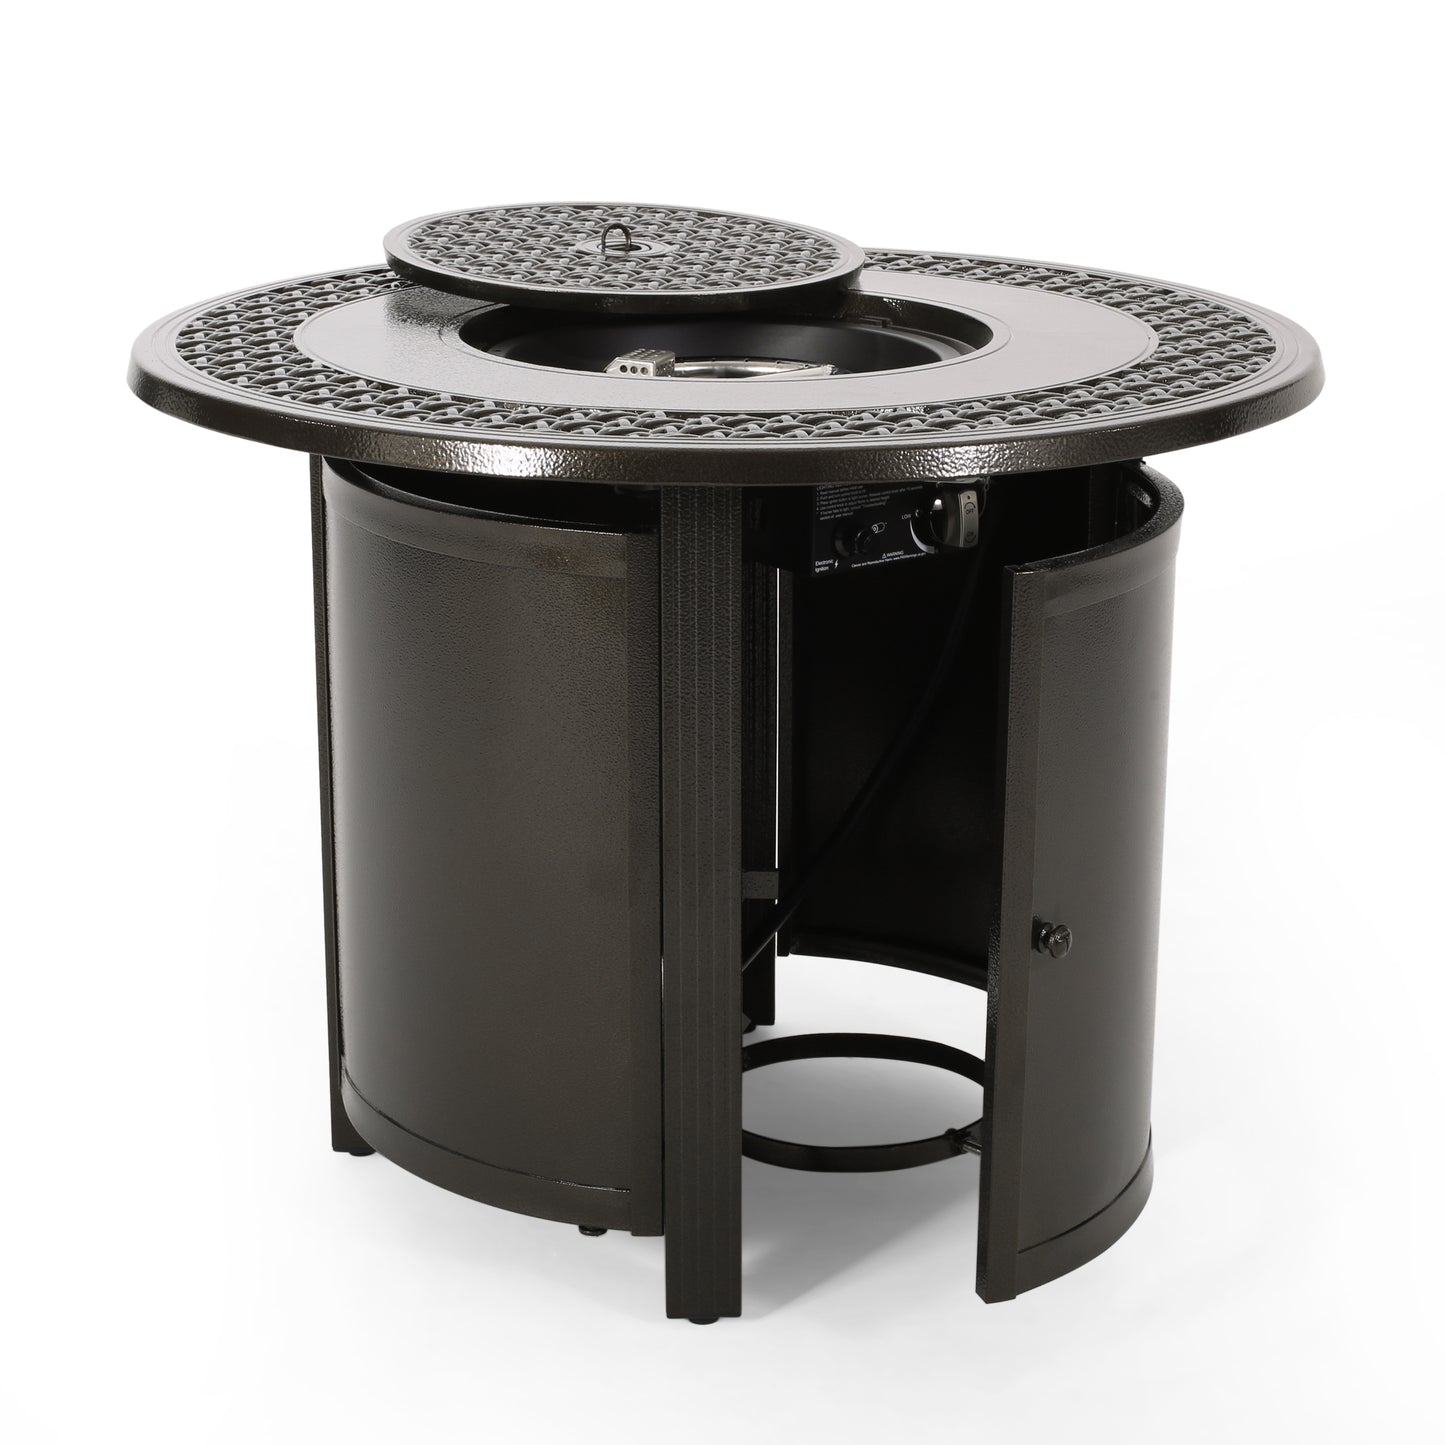 Maycol Round Aluminum Propane Fire Pit Table